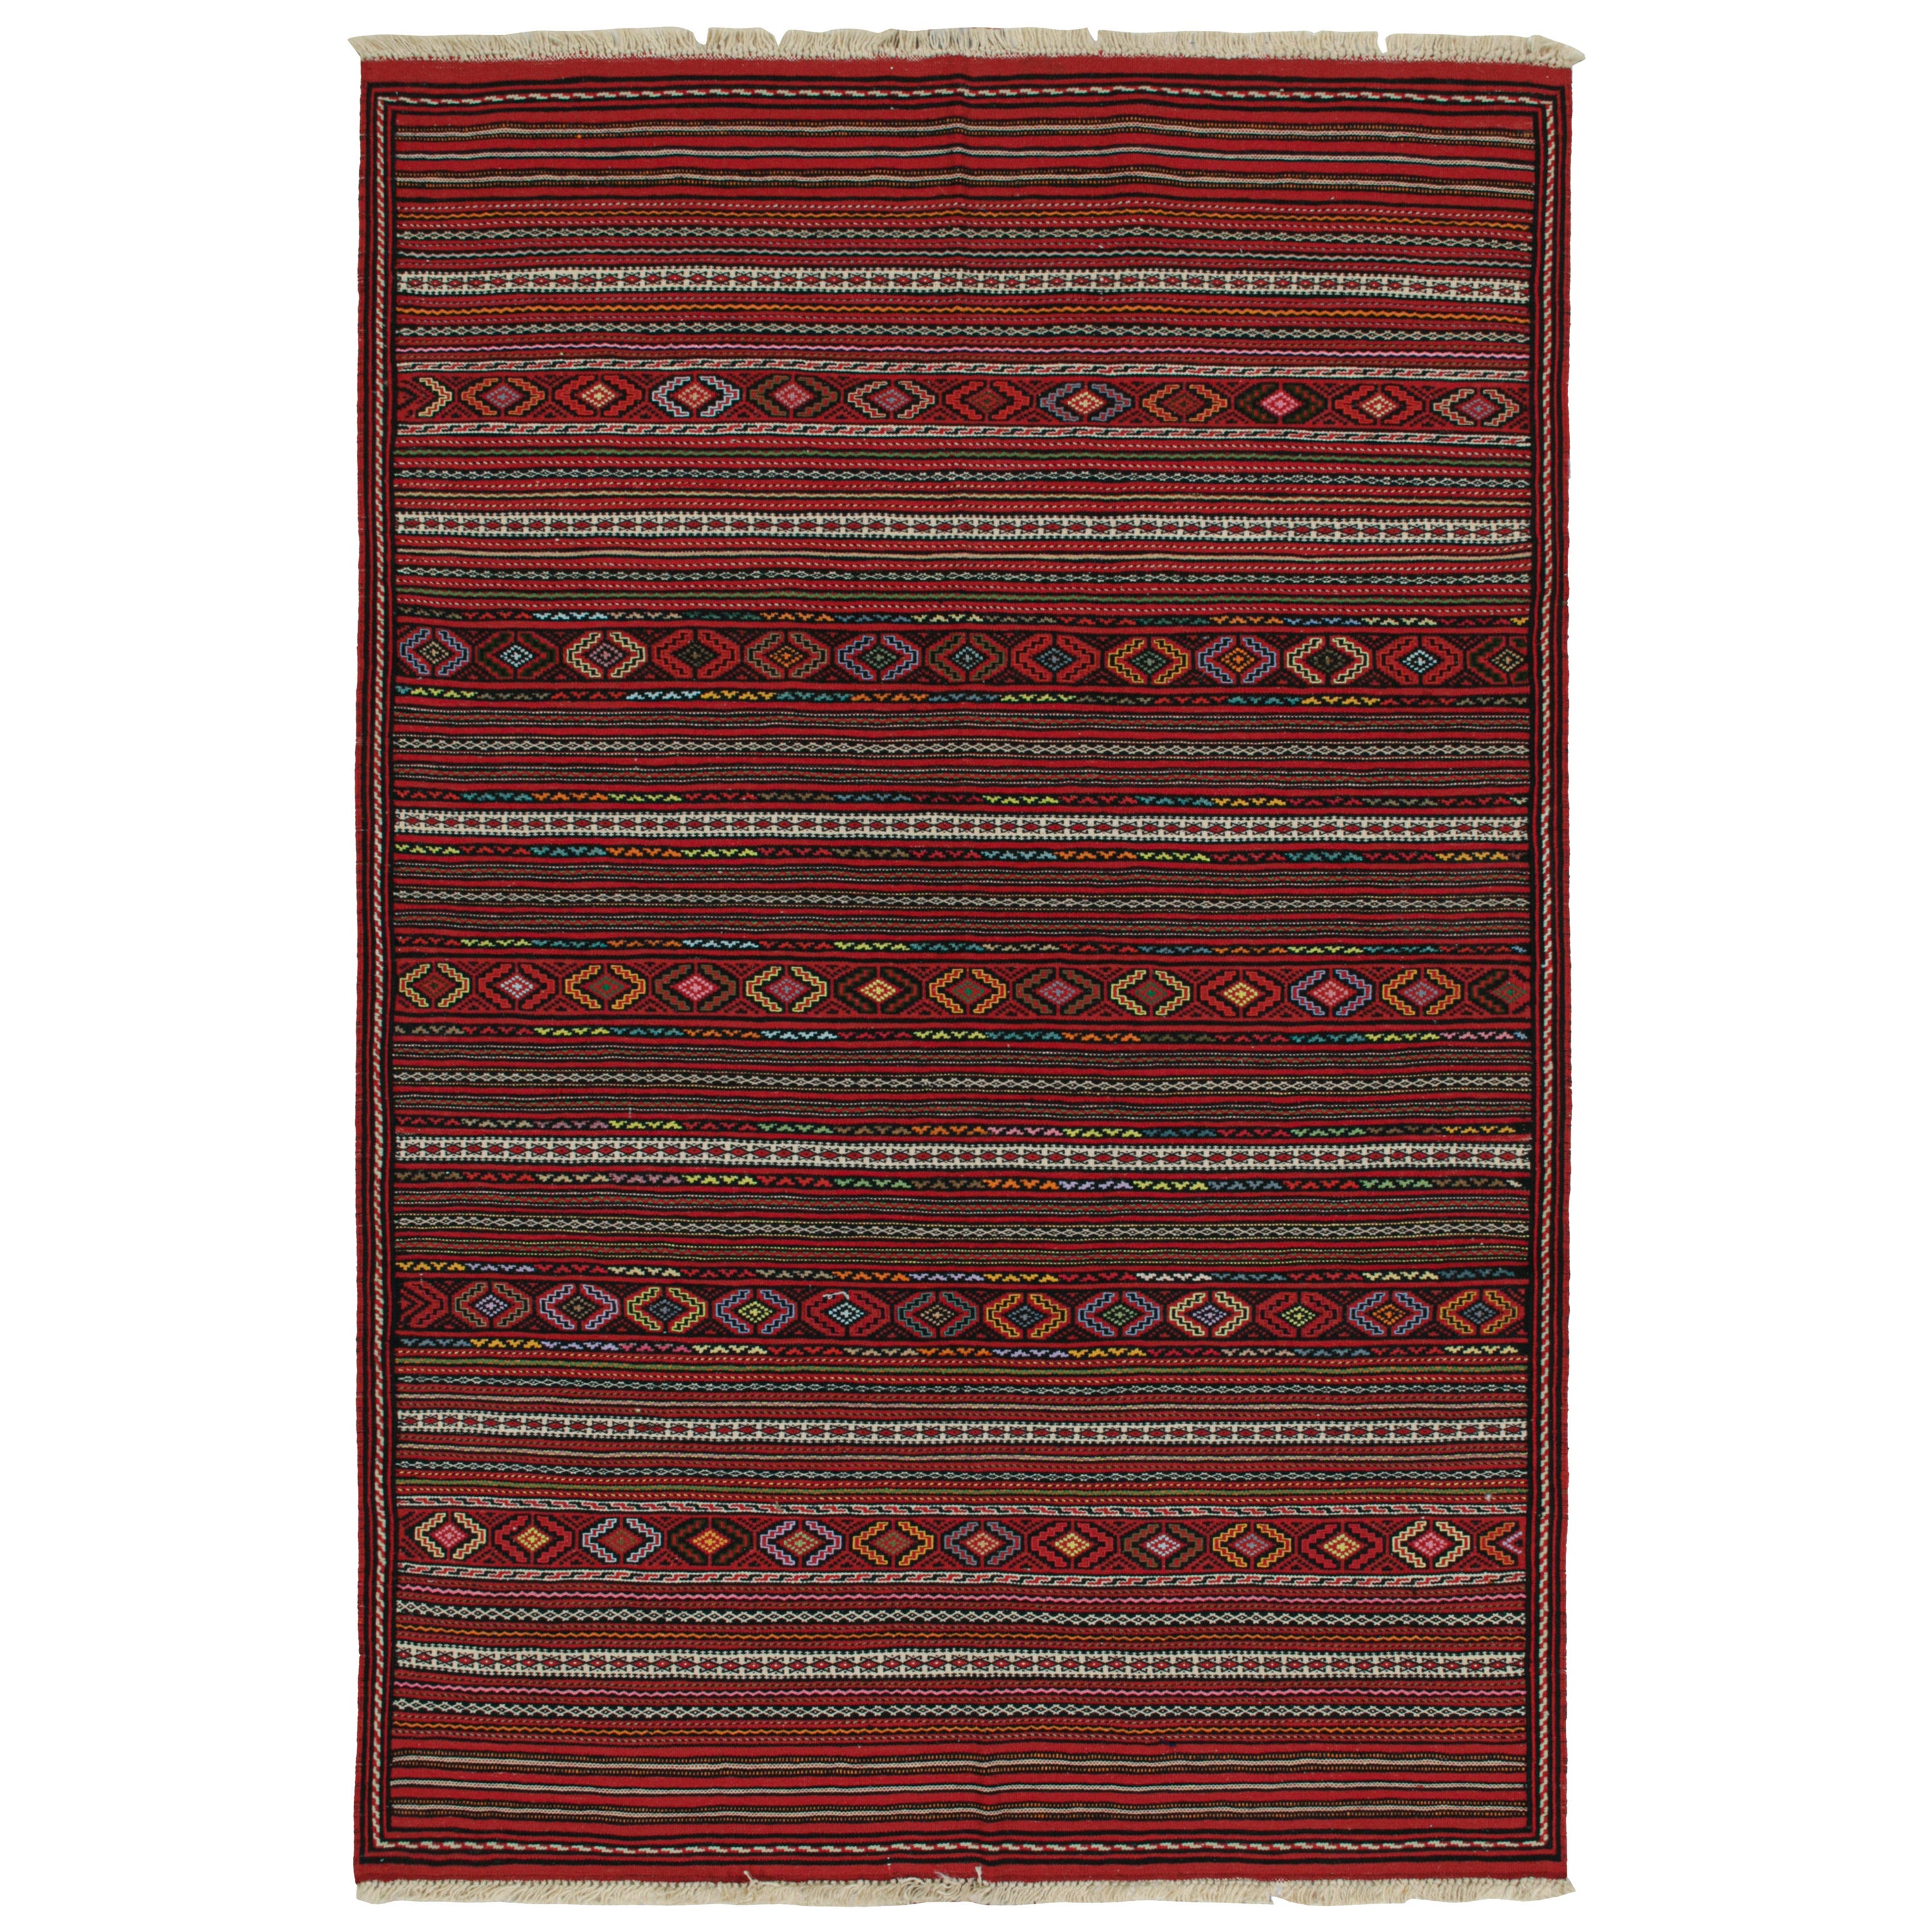 Vintage Baluch Kilim in Red with Stripes & Geometric Patterns, from Rug & Kilim